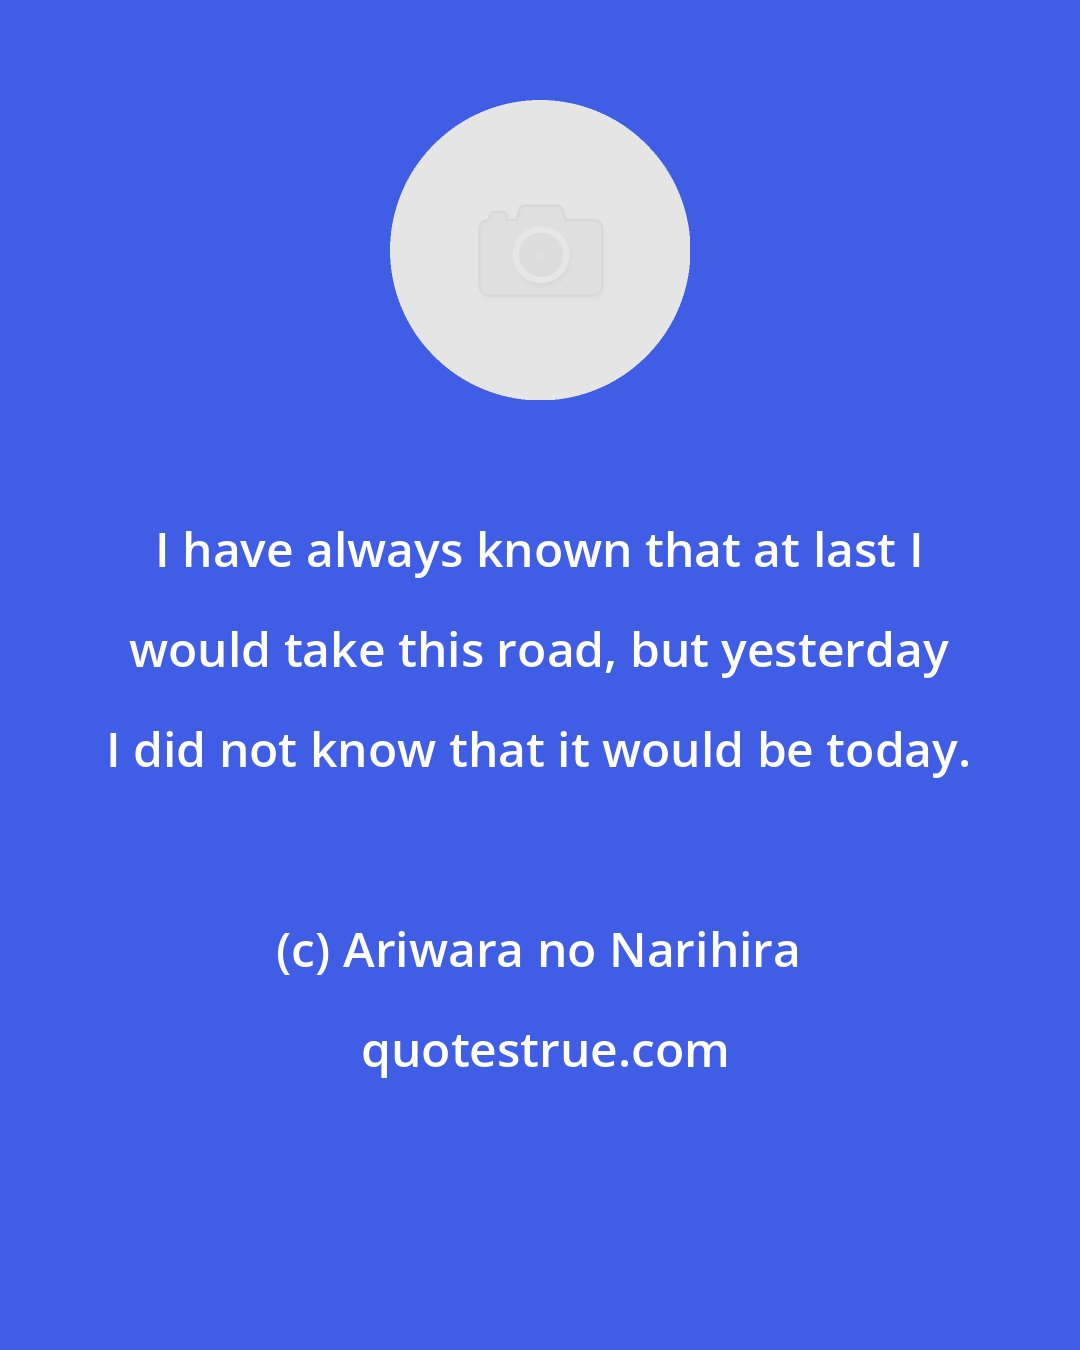 Ariwara no Narihira: I have always known that at last I would take this road, but yesterday I did not know that it would be today.